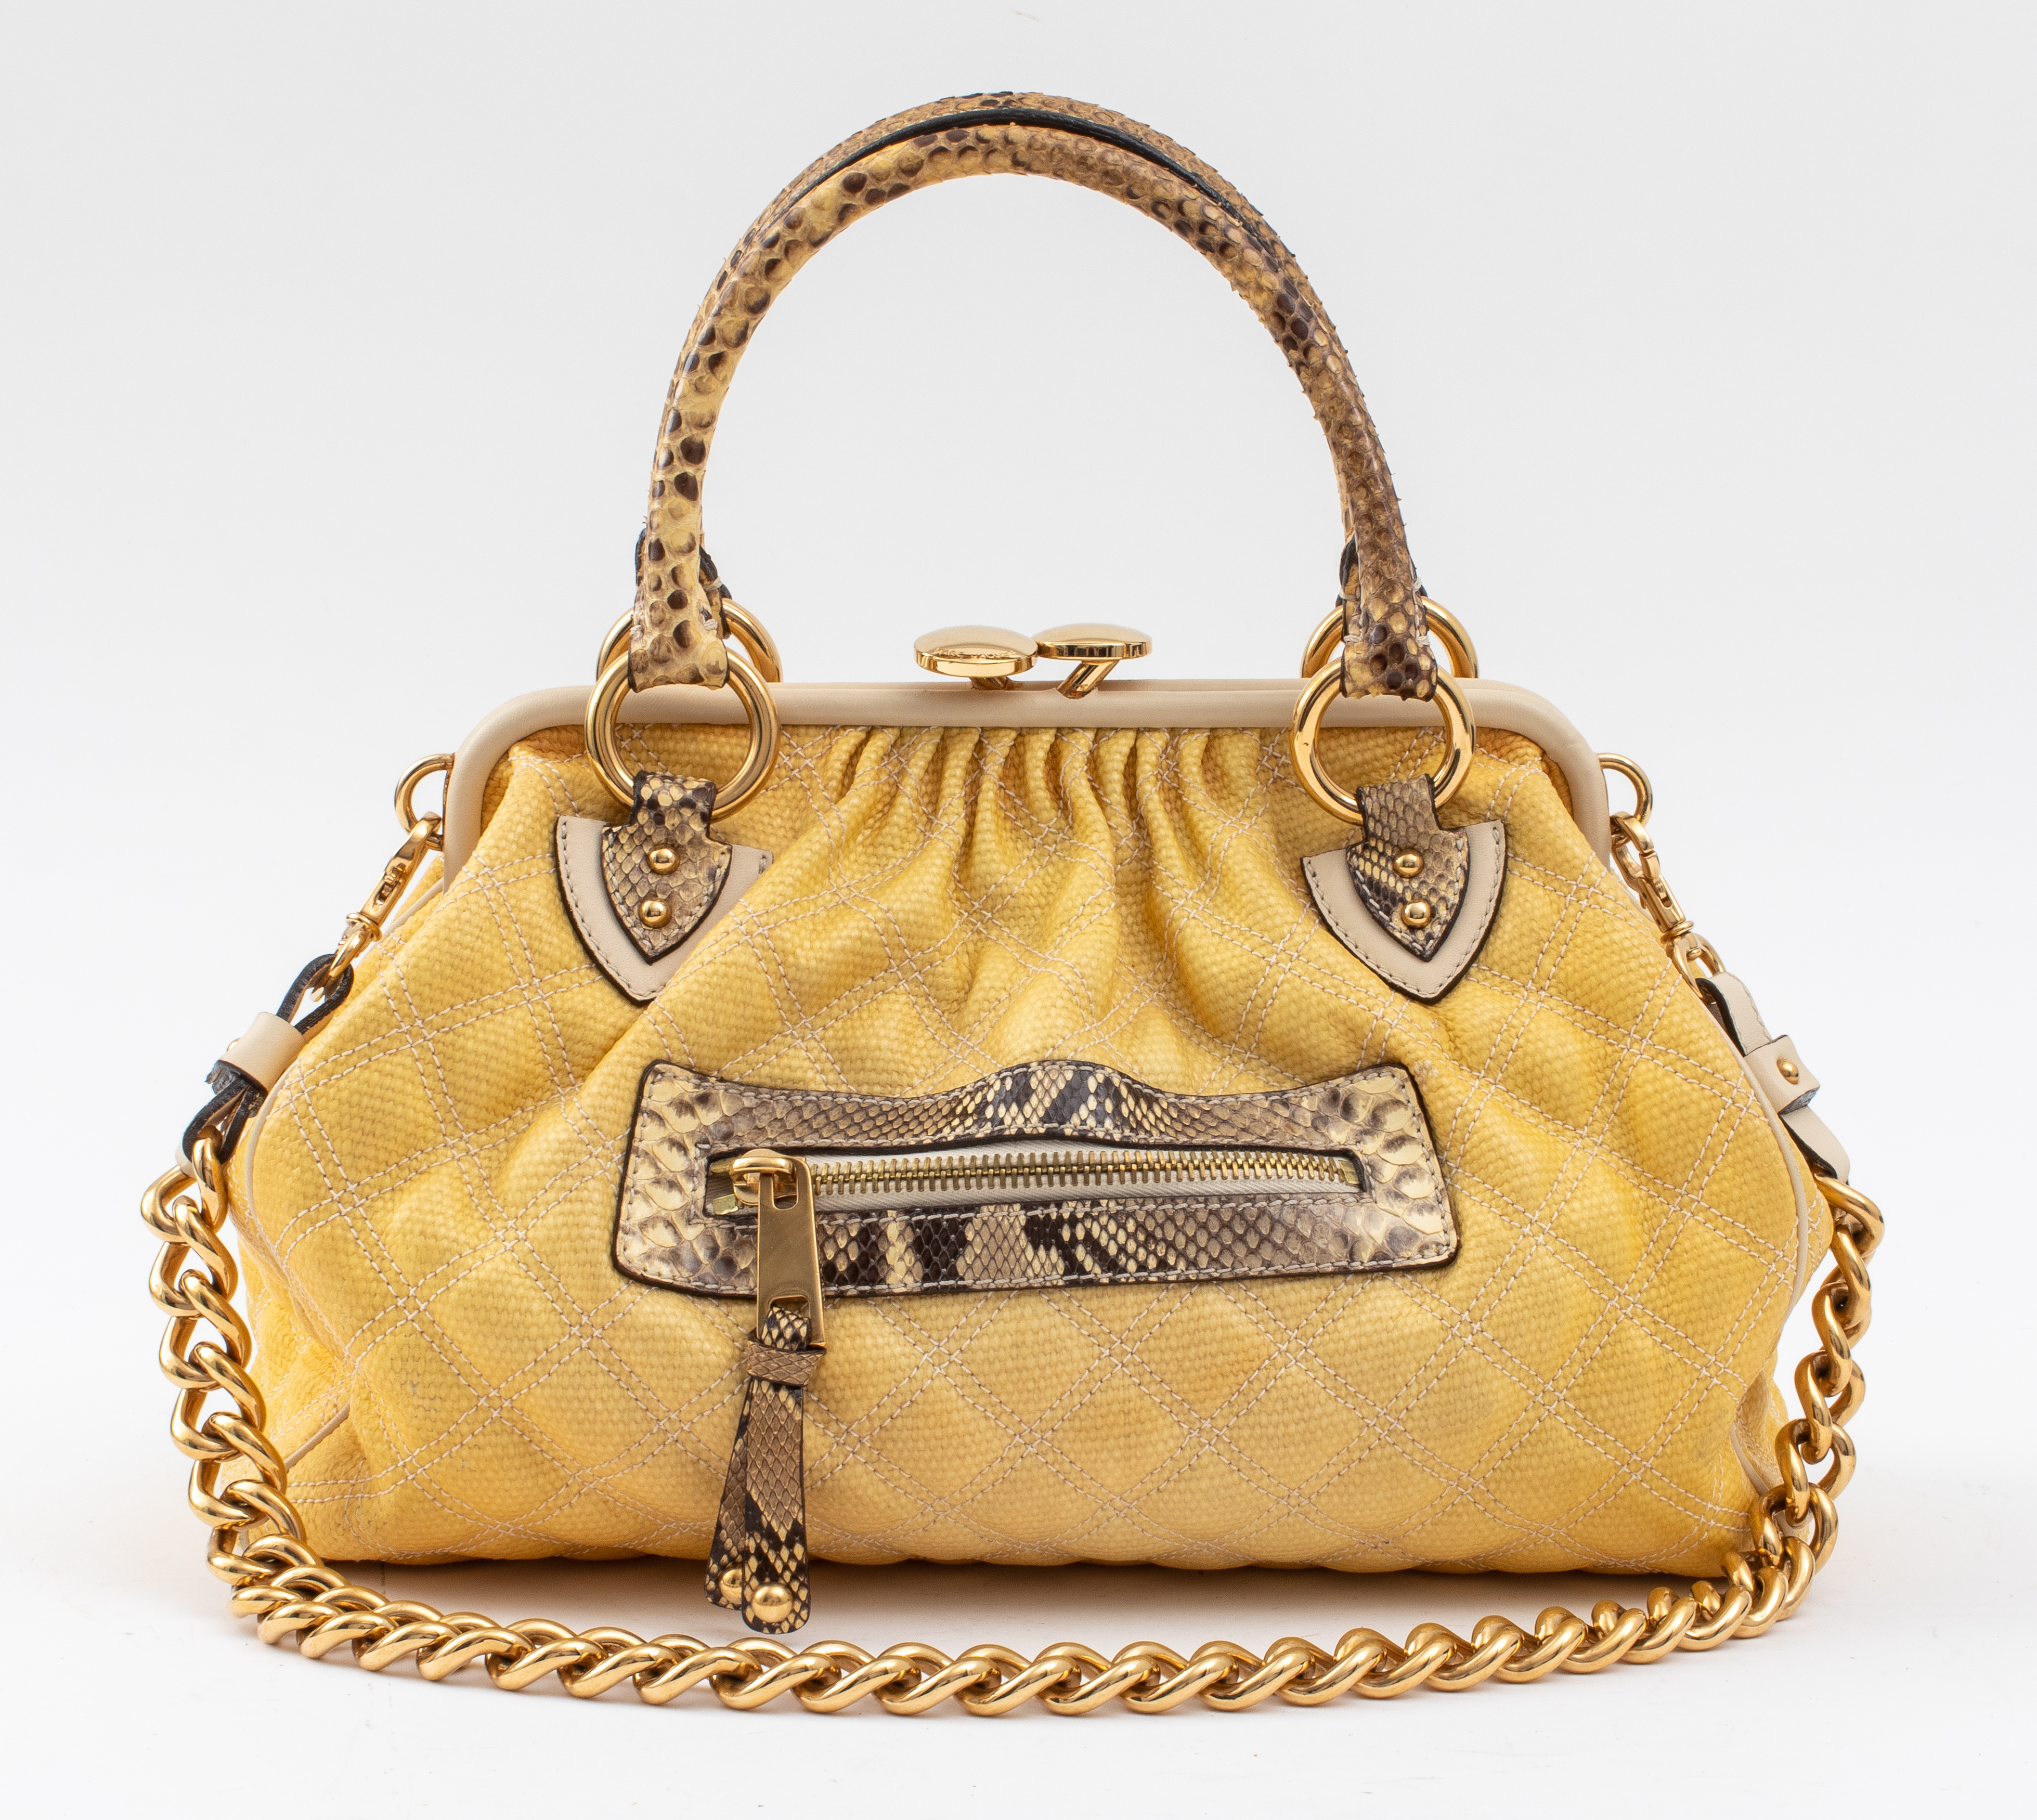 MARC JACOBS QUILTED STAM BAG WITH 2bc7e2